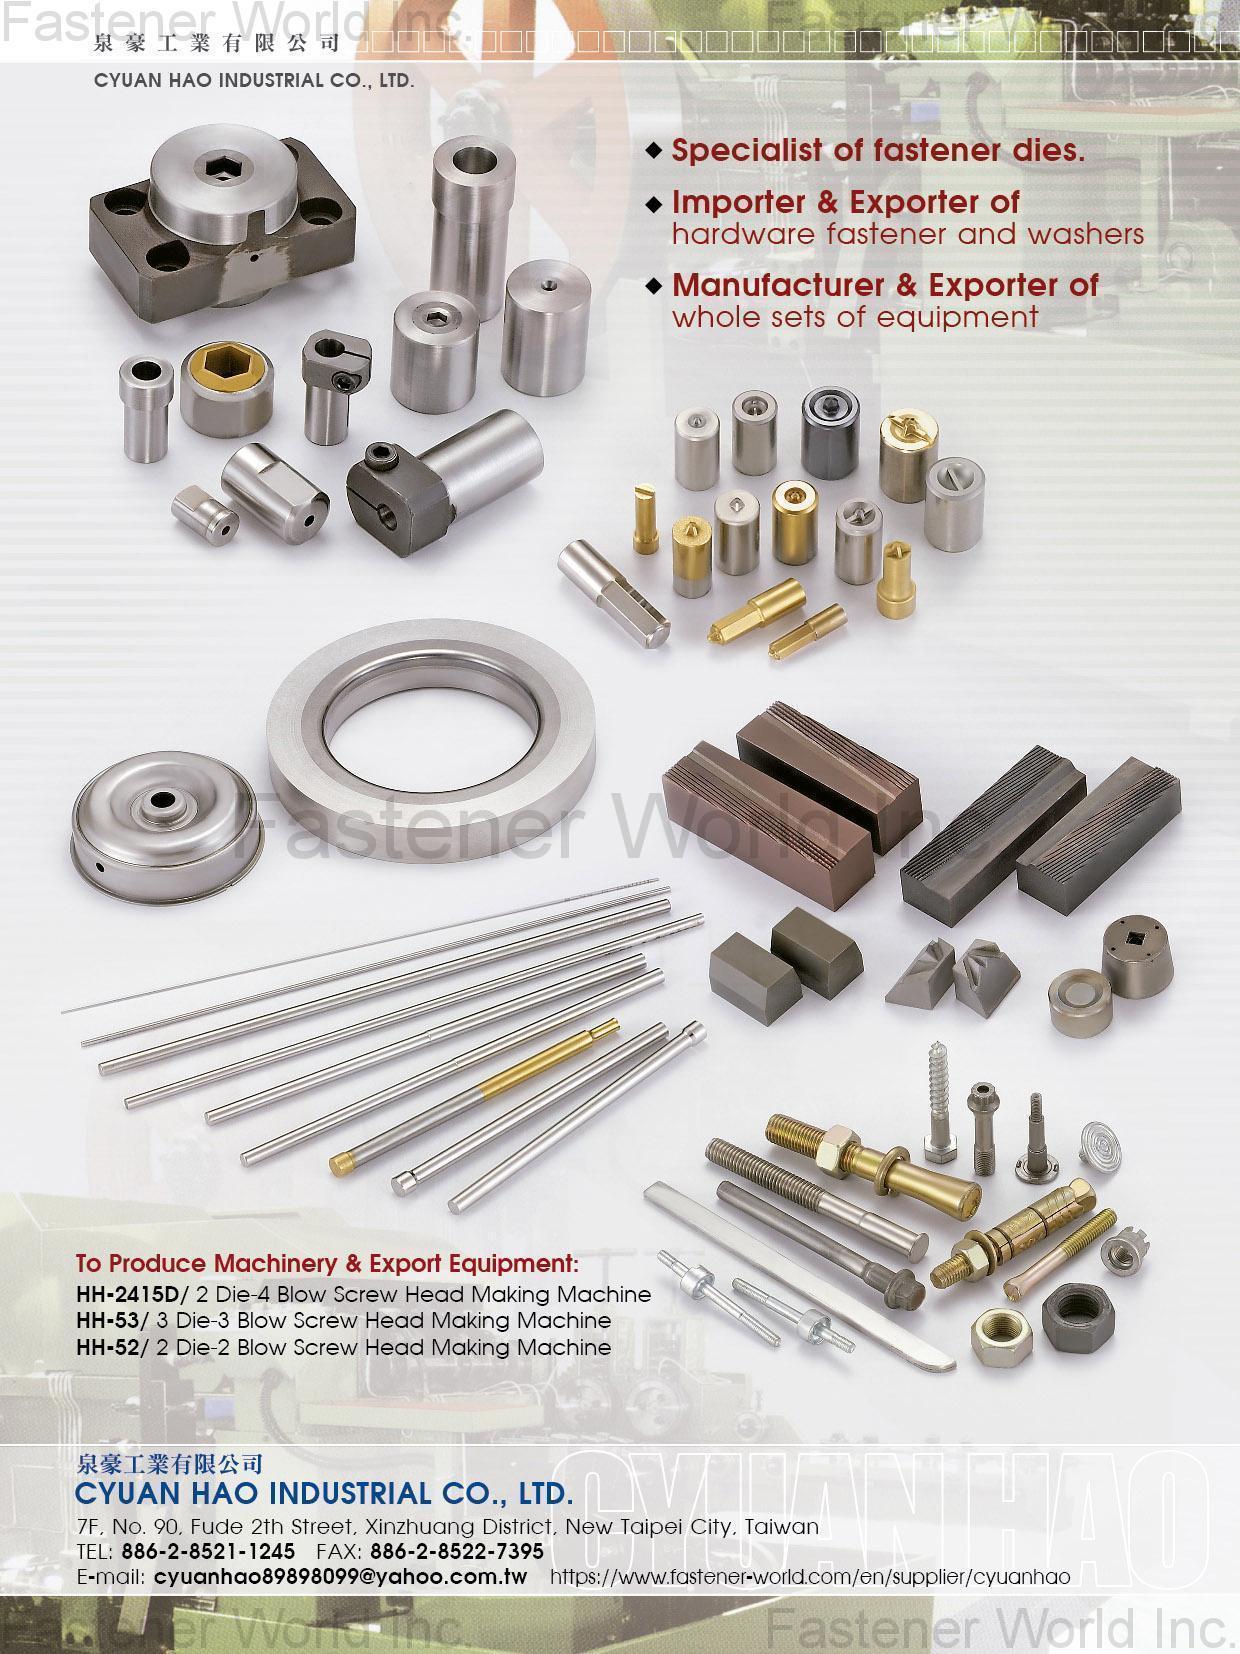 CYUAN HAO INDUSTRIAL CO., LTD. , Specialist of Fastener Dies Importer & Exporter of Hardware Fastener and Washers